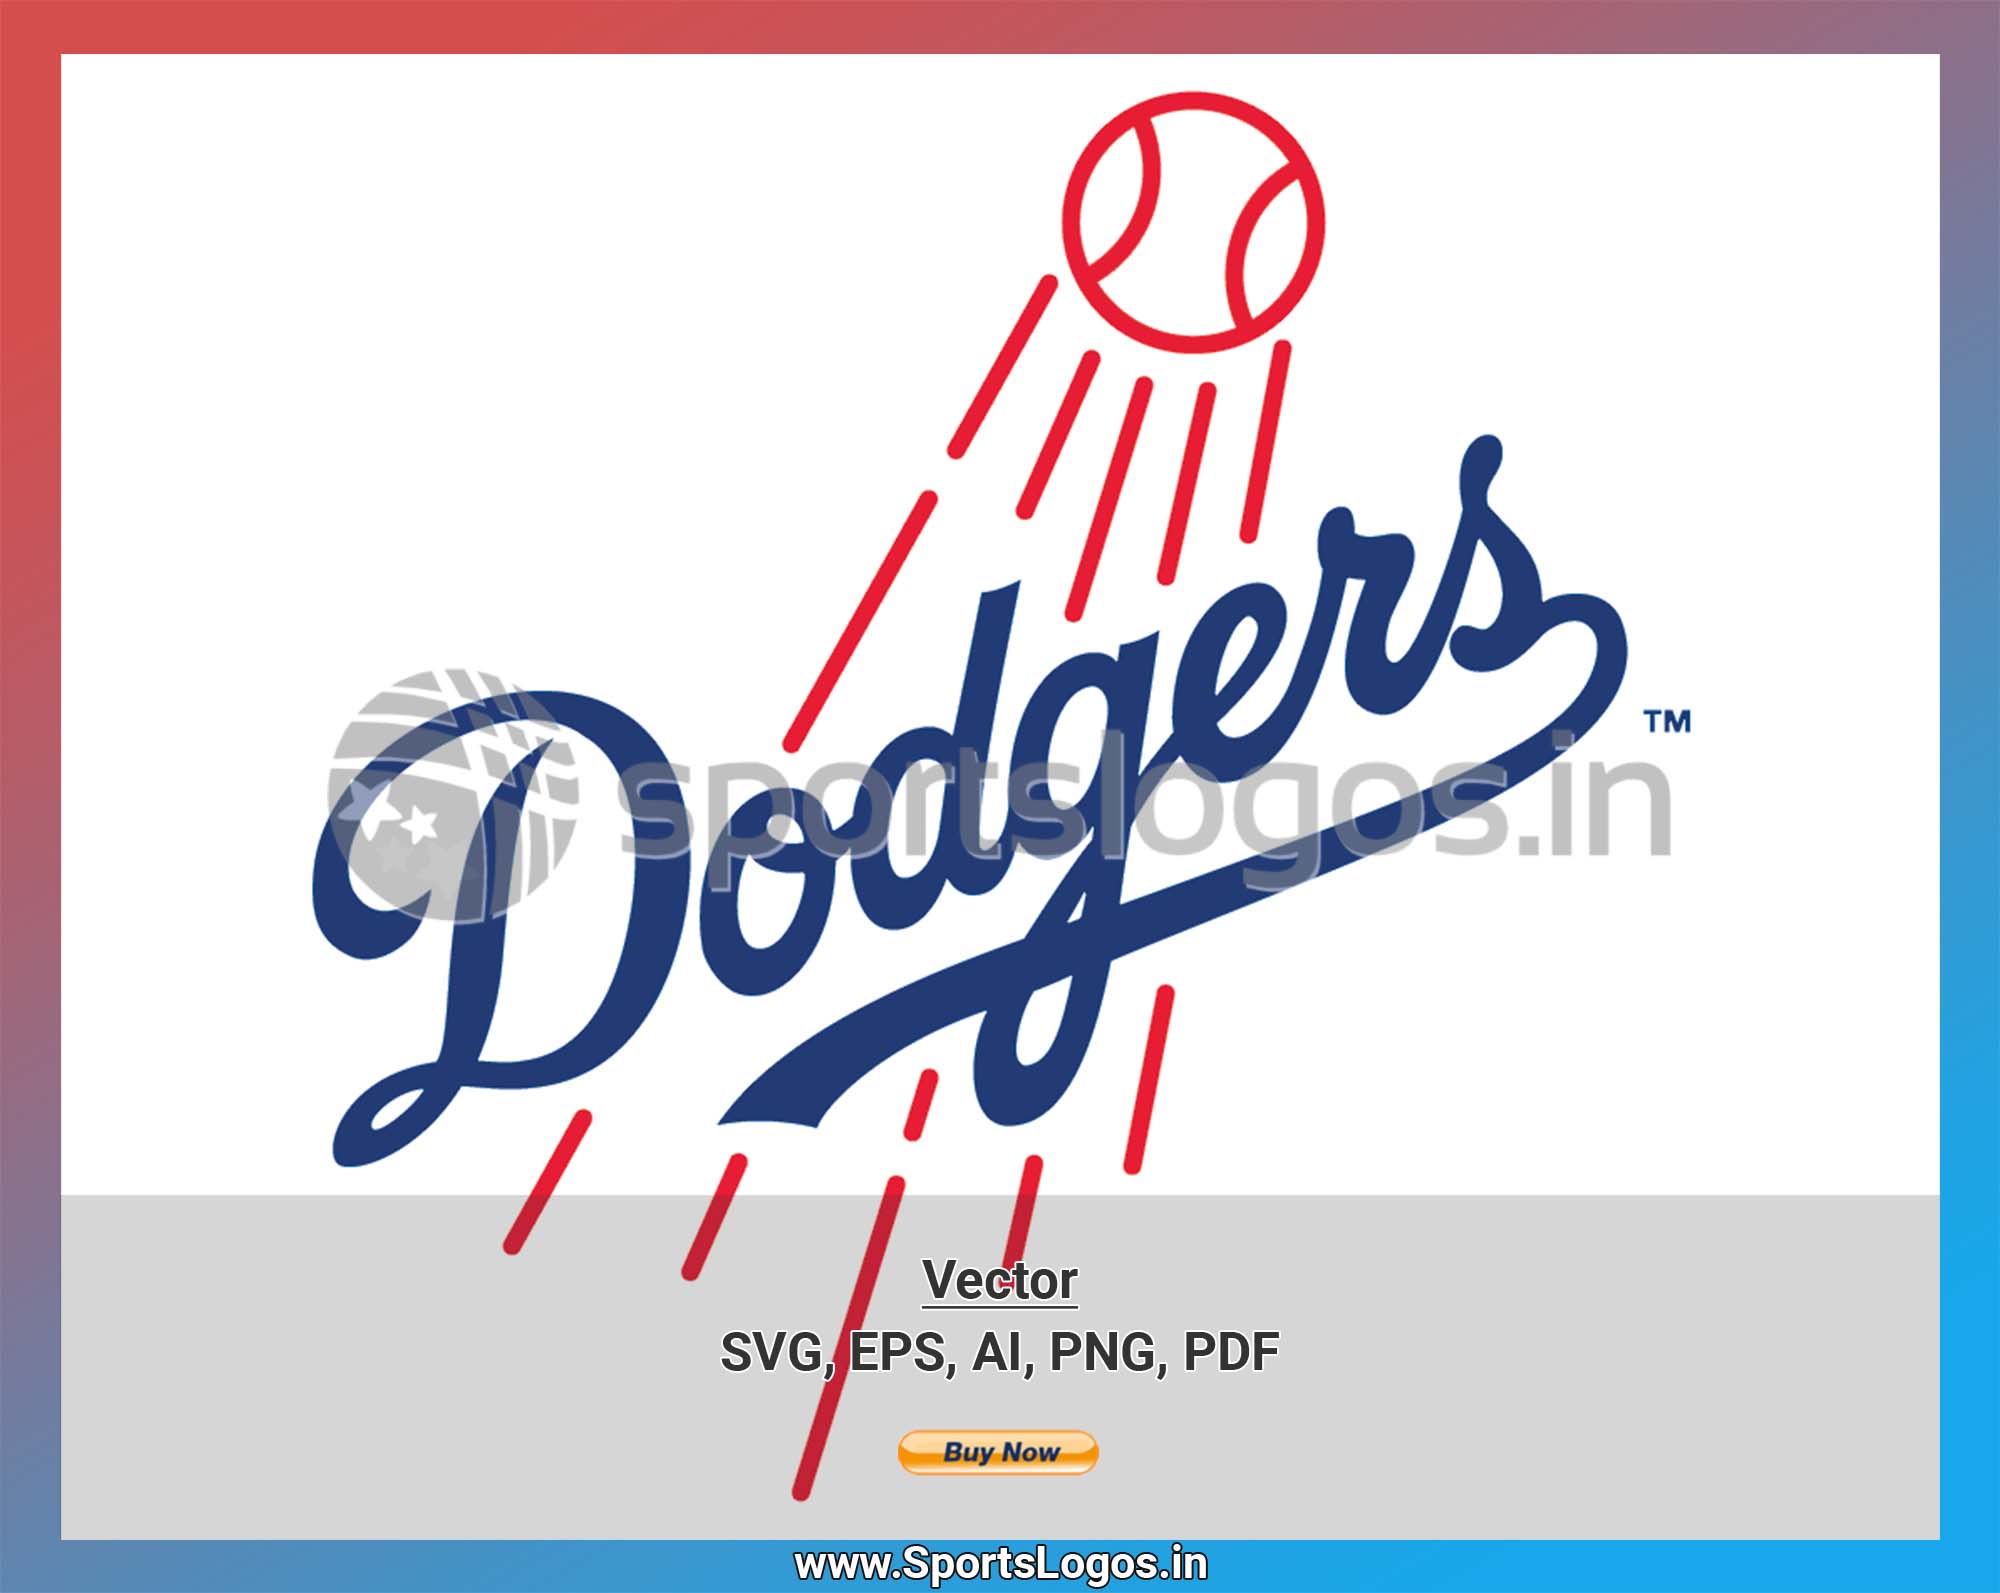 Los Angeles Dodgers - Sports logo - patch - patches - collect - collection  - sports emblem - insignia - baseball - embroidery - embroidered - MLB -  Major League…